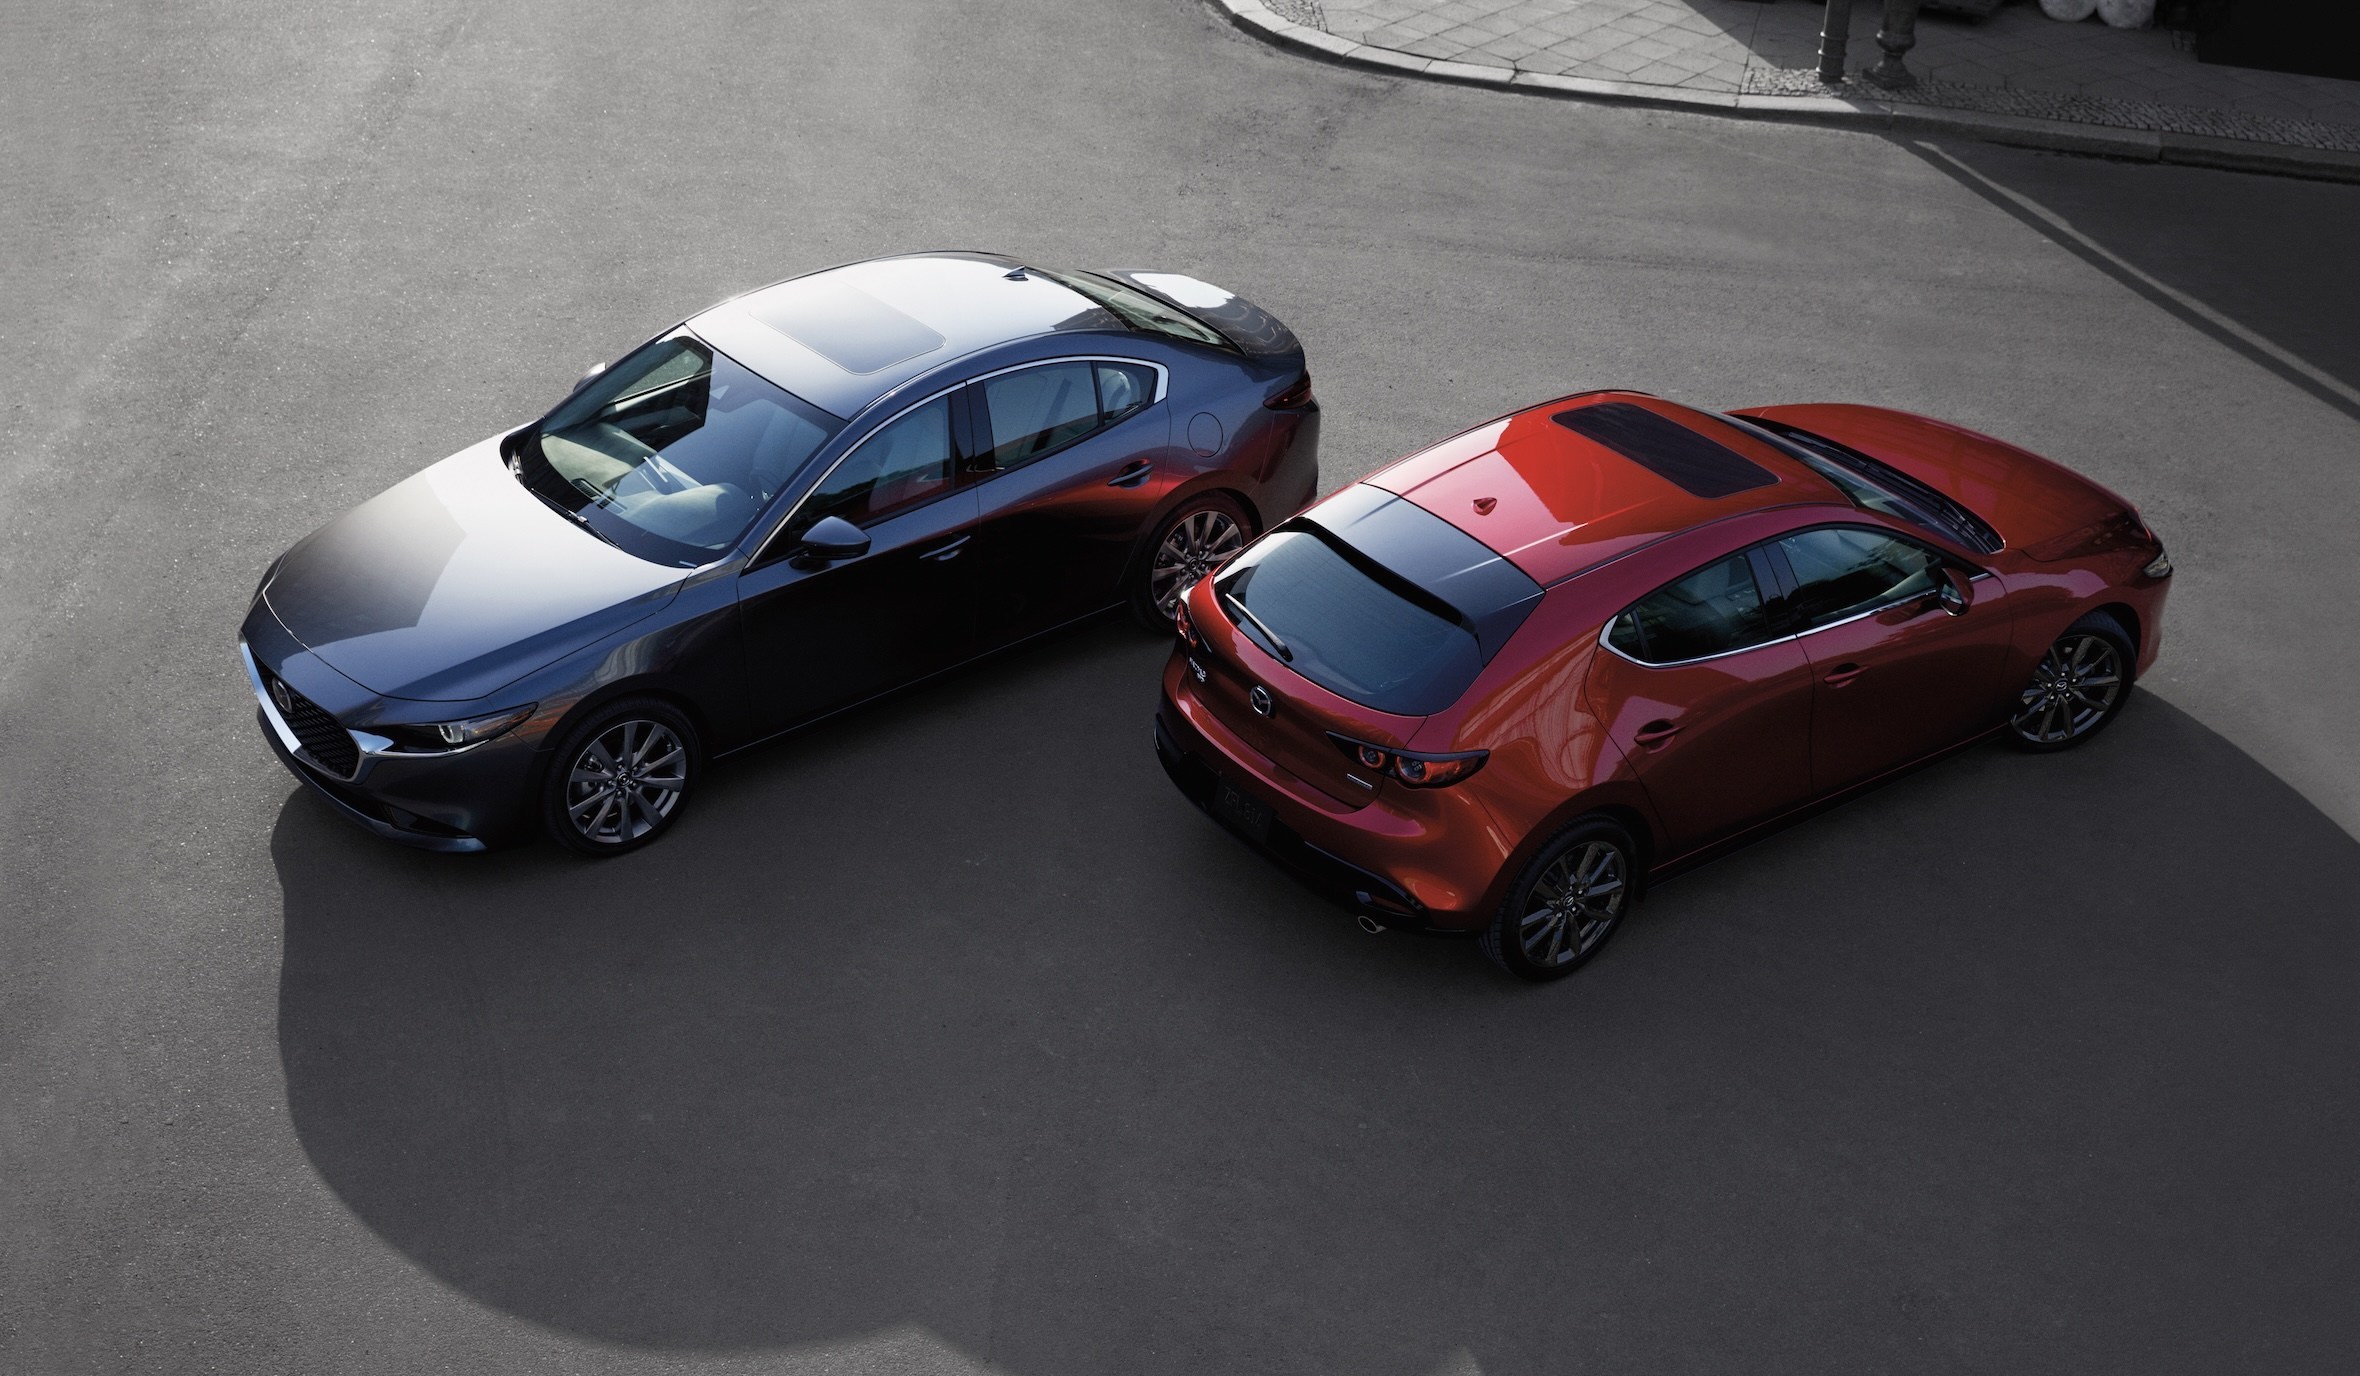 2023 Mazda3: Pricing and Packaging - Aug 16, 2022